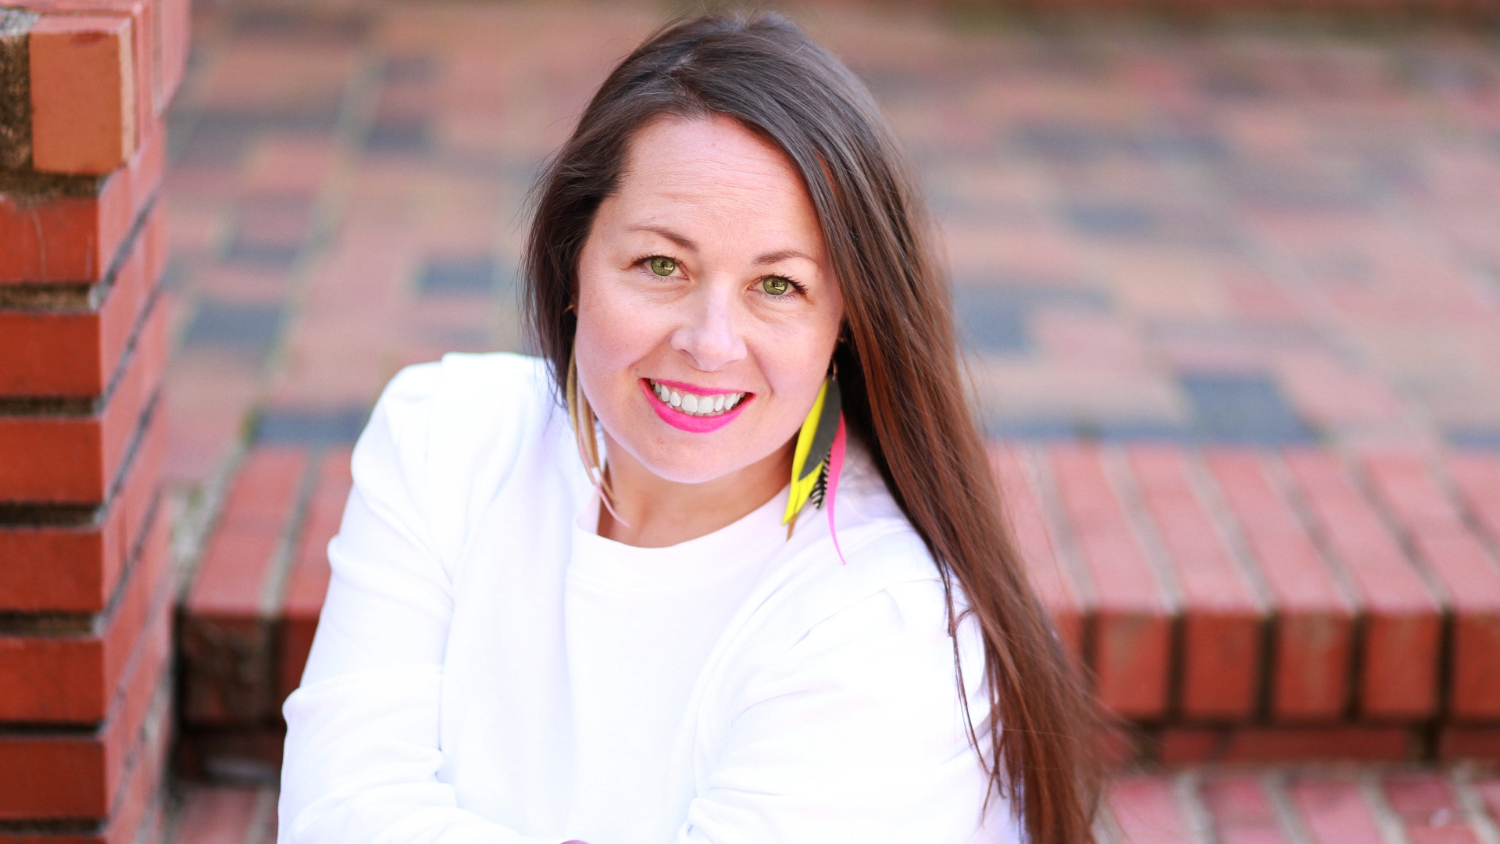 A white woman with long brown hair posing outside on brick steps wearing a white top and colorful feather earrings.